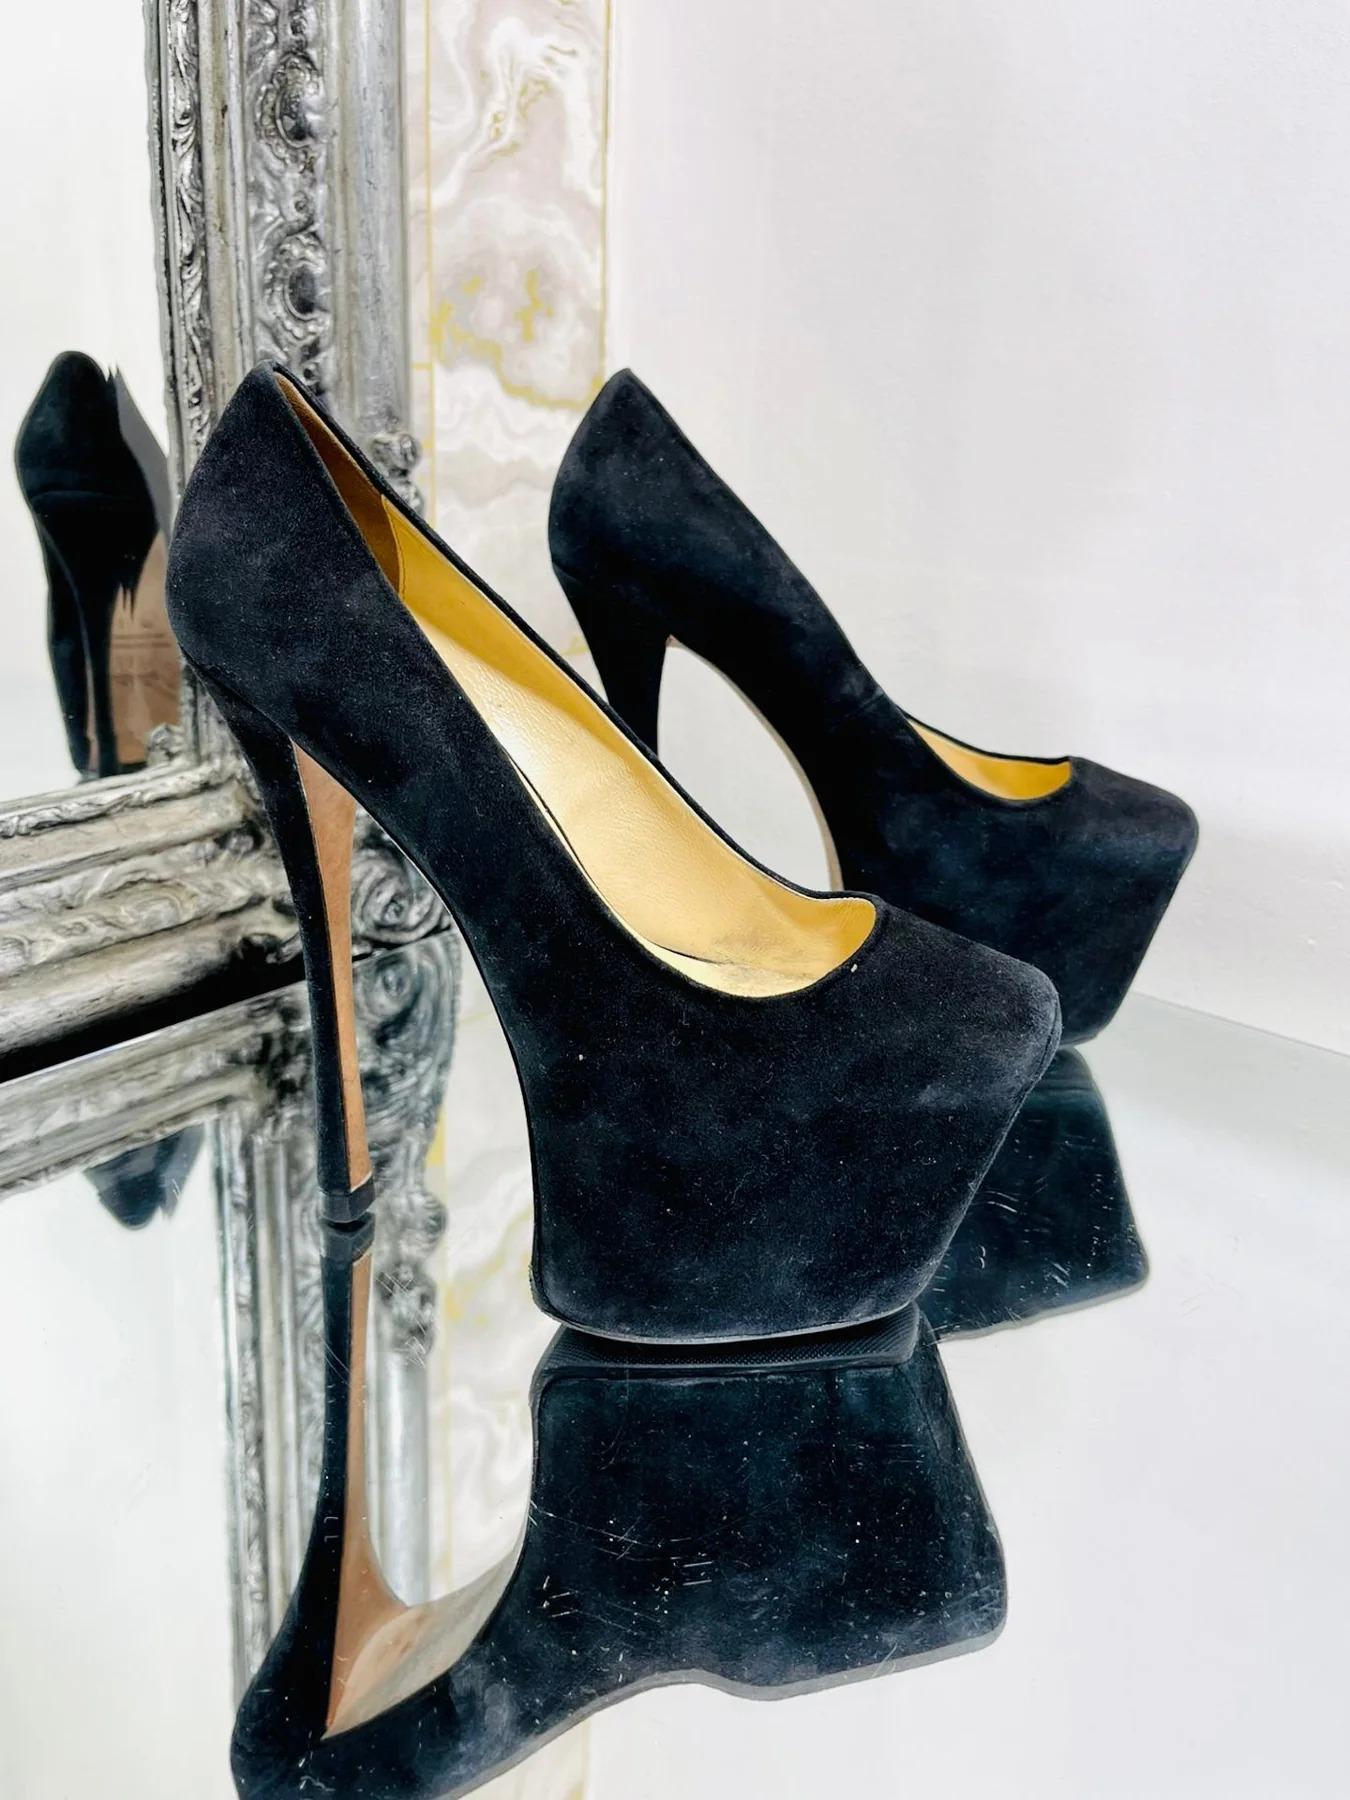 Giuseppe Zanotti Heels. Size 35

Black suede, with square fronts and very high heels.

Additional information:
Size – 35
Composition- Leather
Condition – Good ( Some signs of wear)
Comes with- Shoes Only 